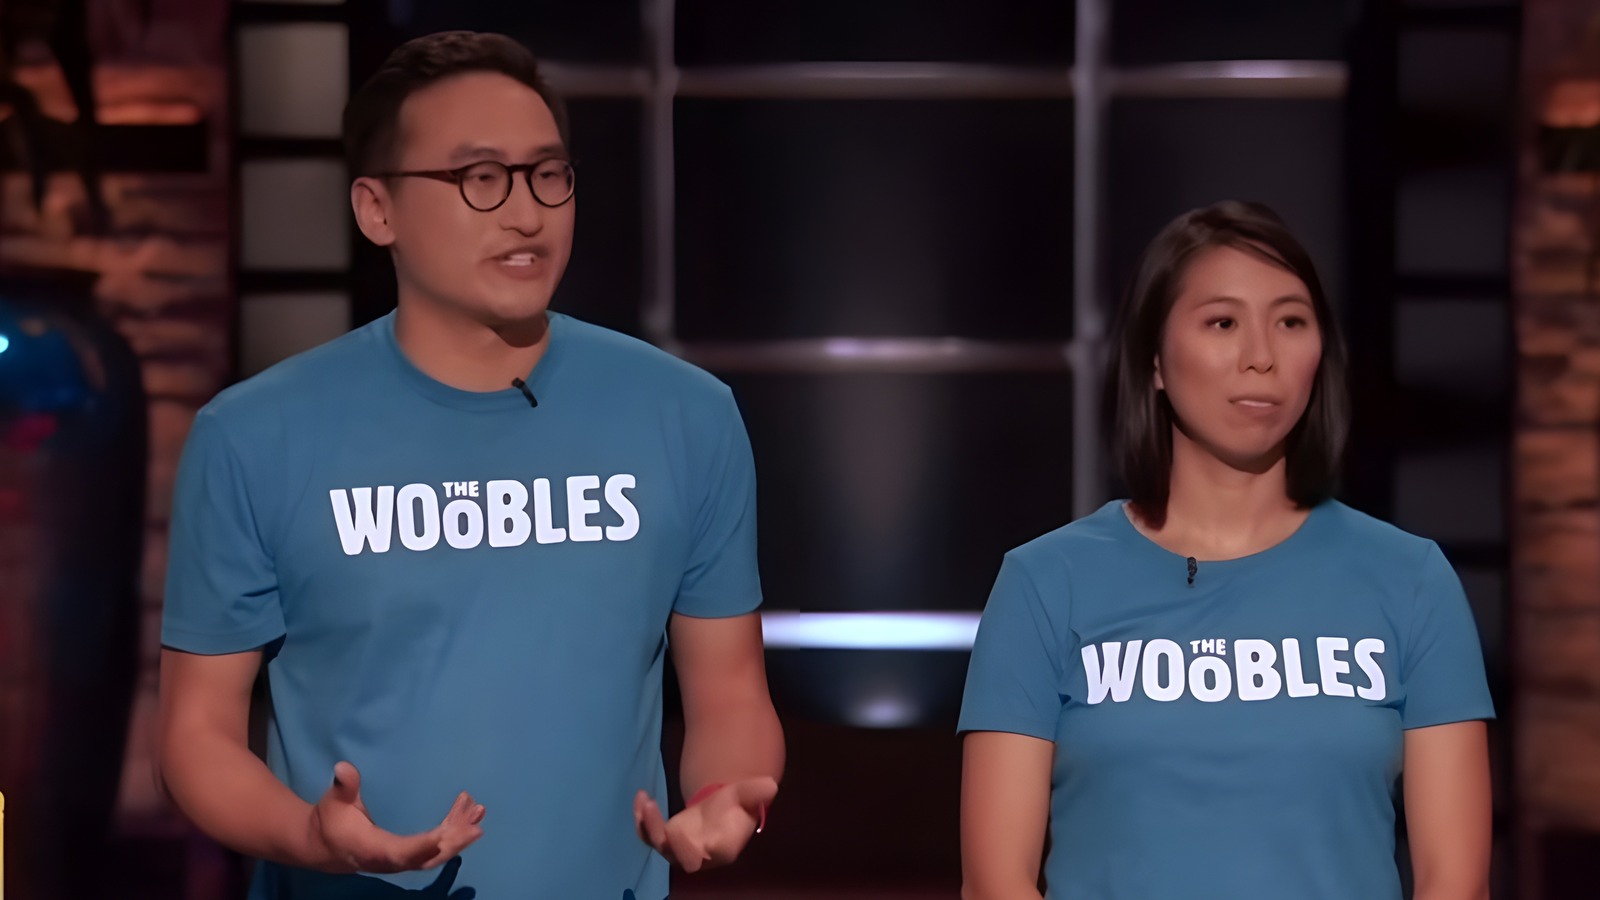 The Woobles - Thank you Google for sharing our story, and